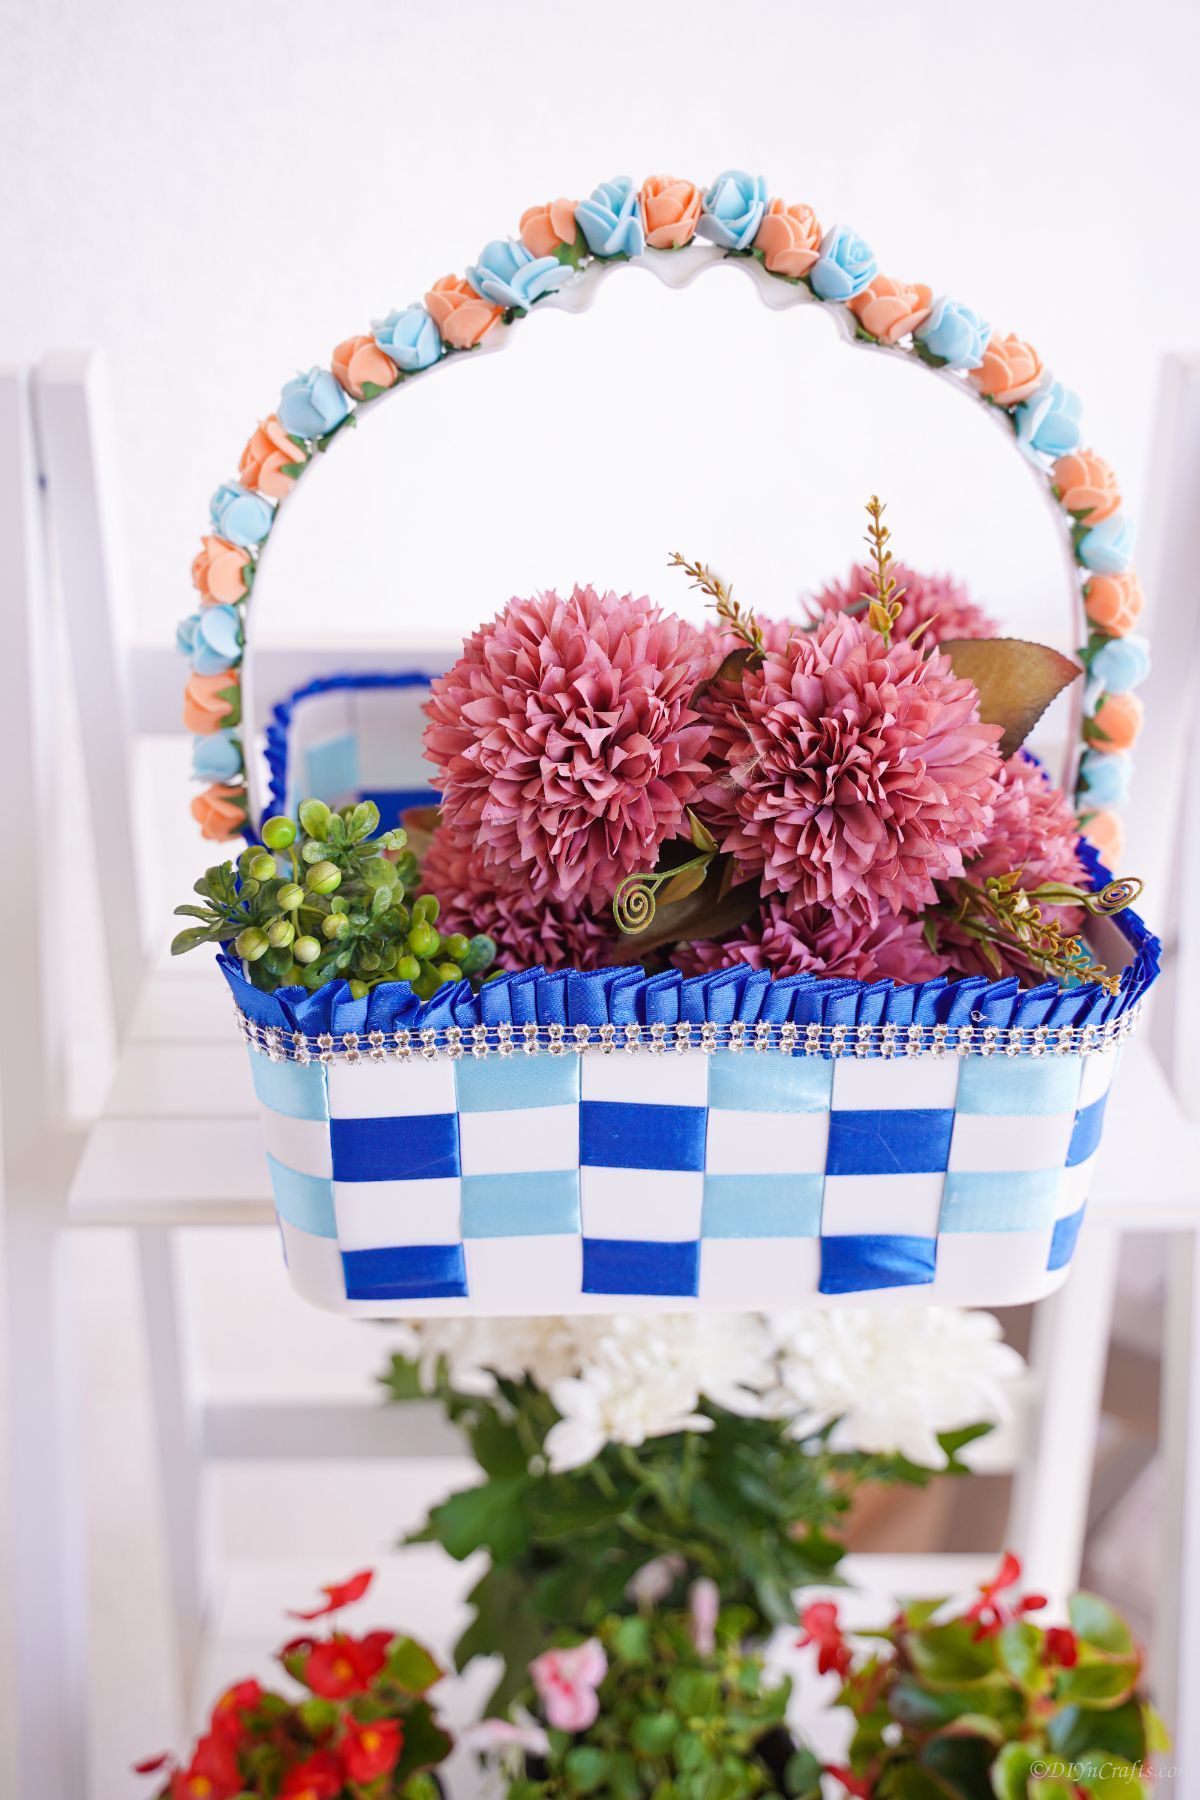 blue and white basket of pink flowers on white shelf